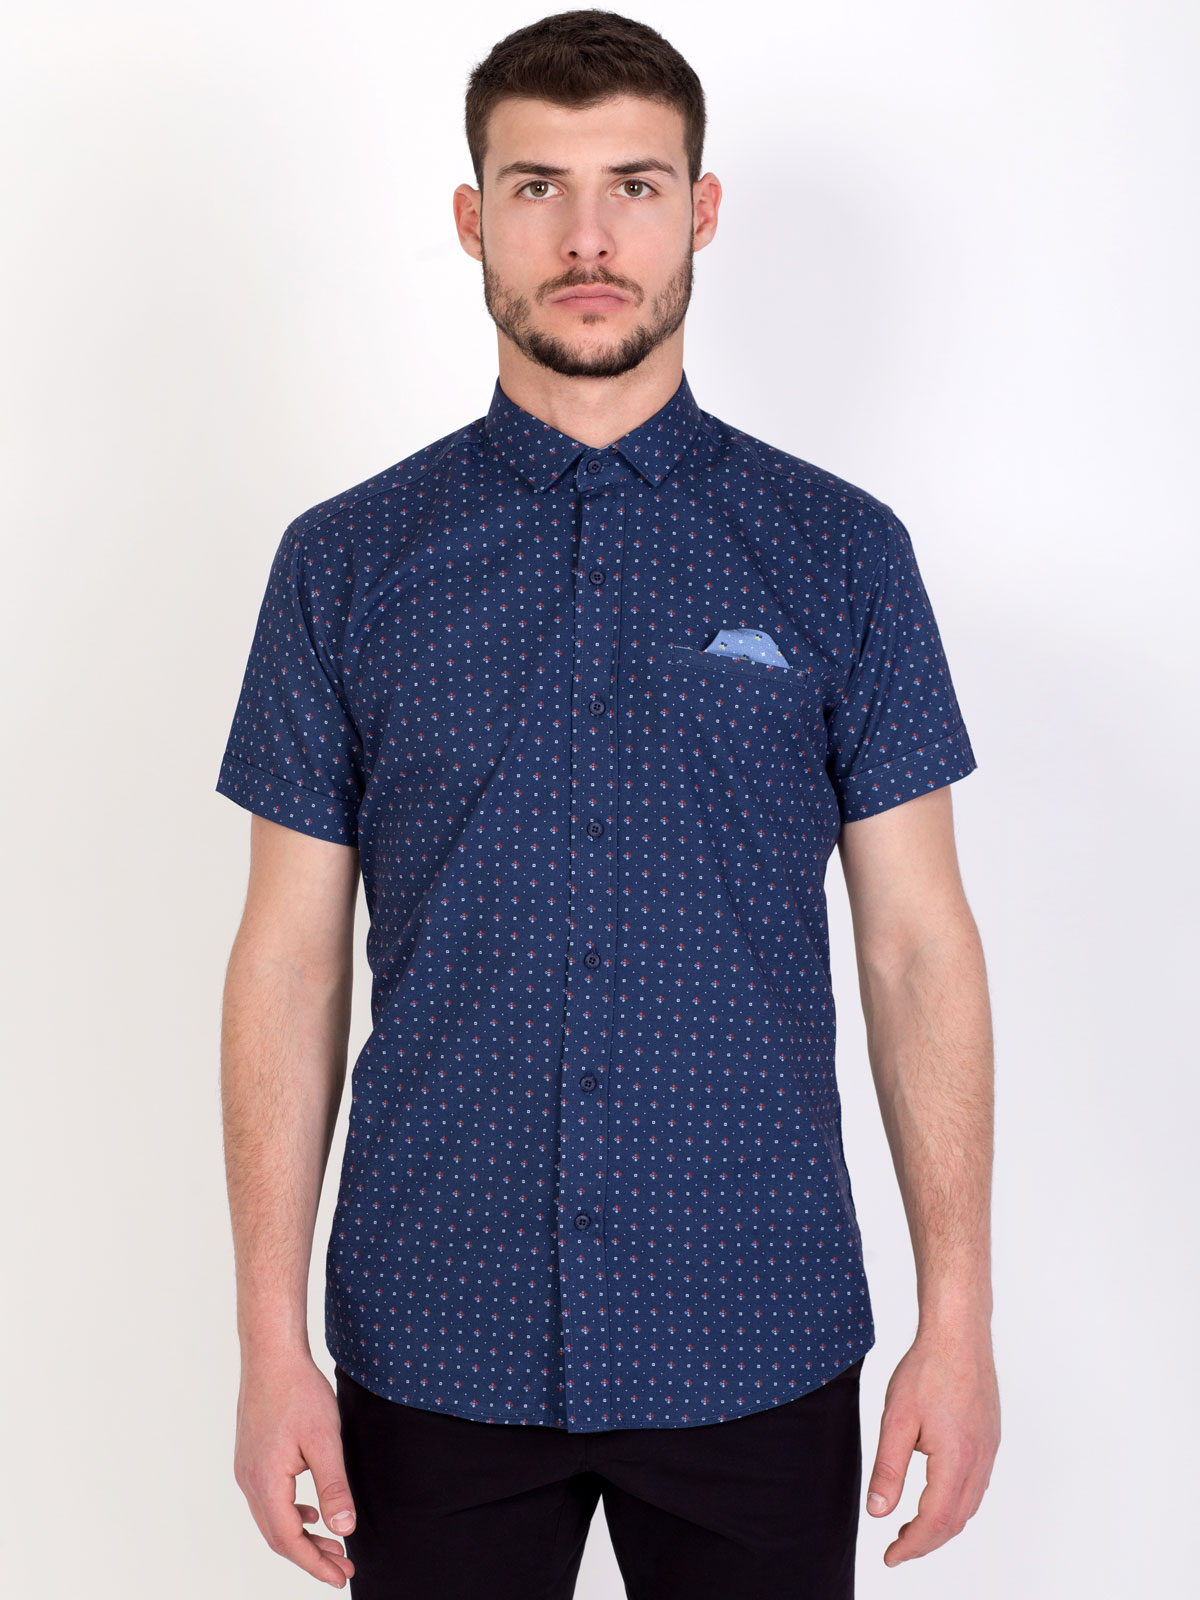 Shirt with short sleeves of figures - 80195 € 21.93 img3